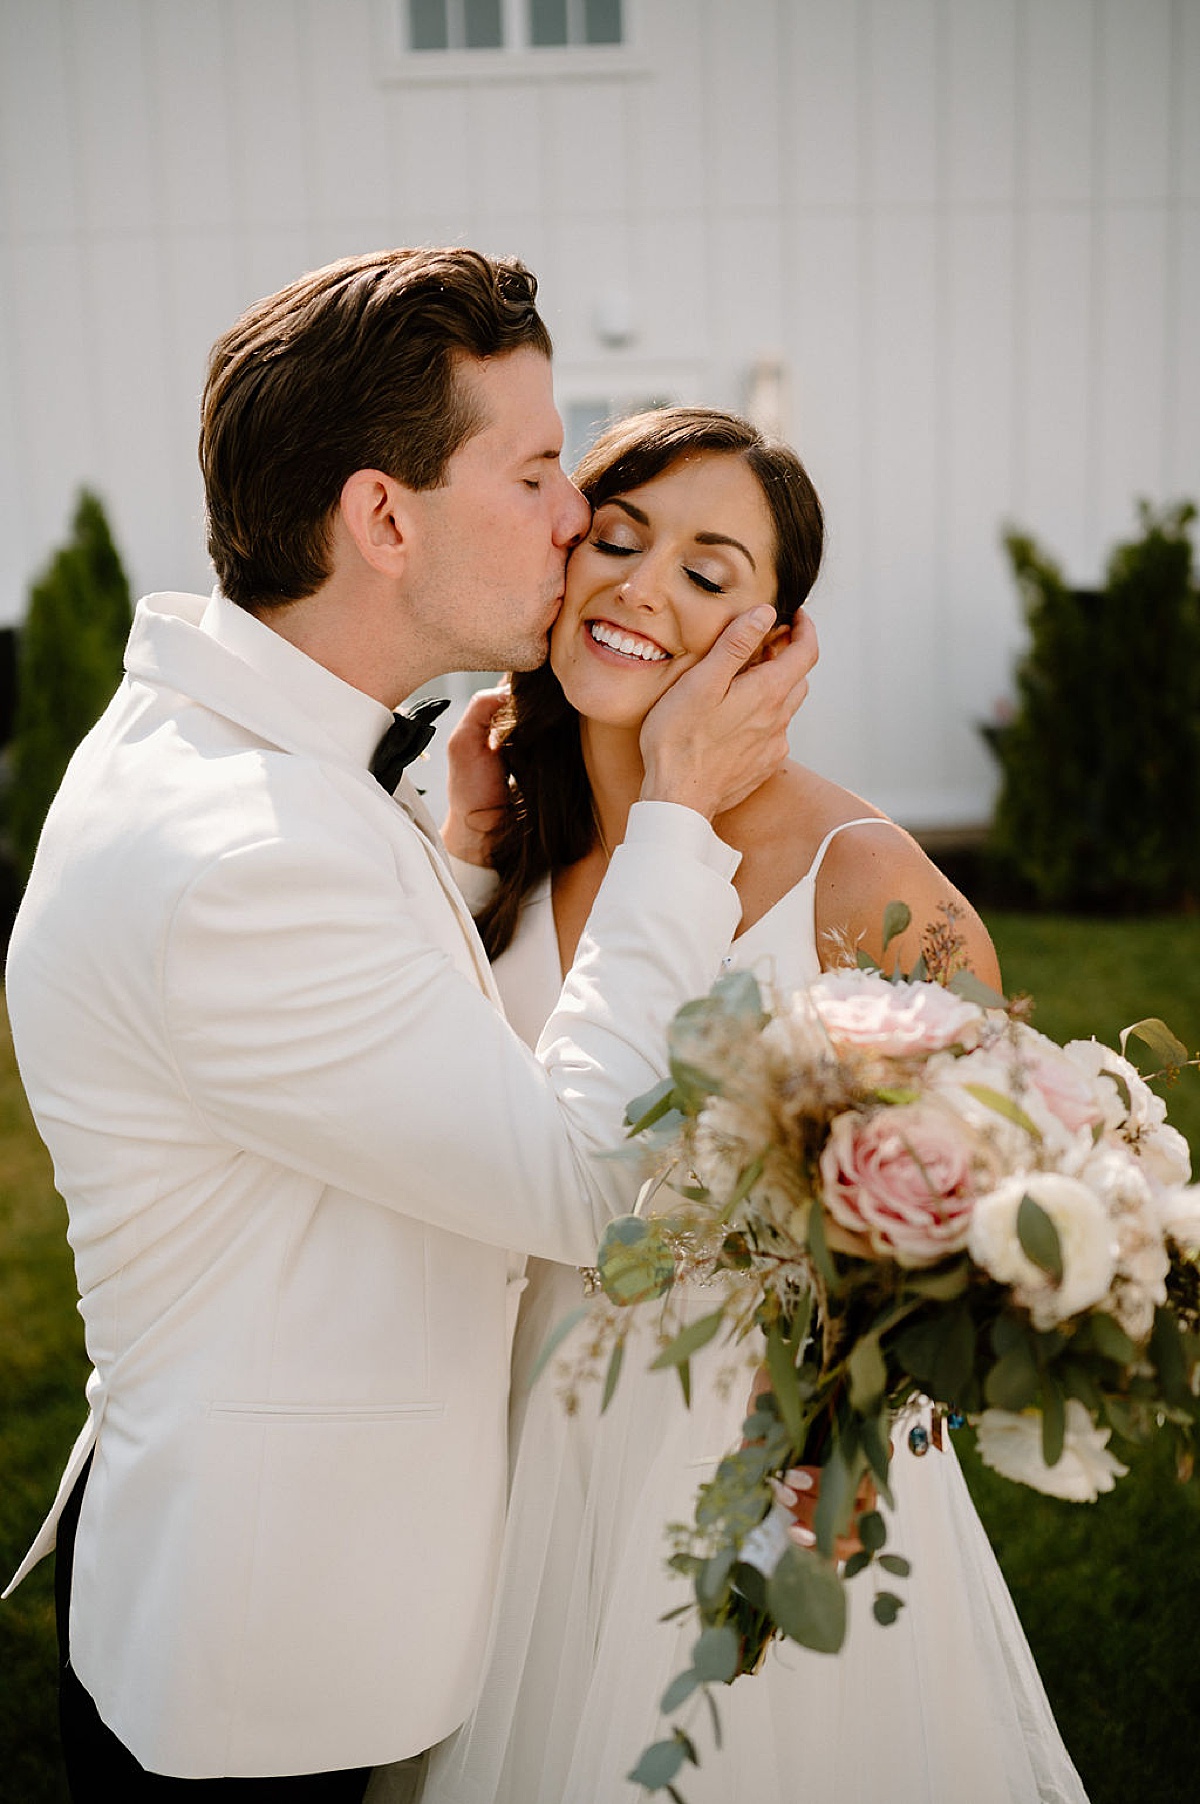 groom in white dinner jacket kisses bride on the cheek as she holds pink and white rose bouquet shot by Indigo Lace Collective